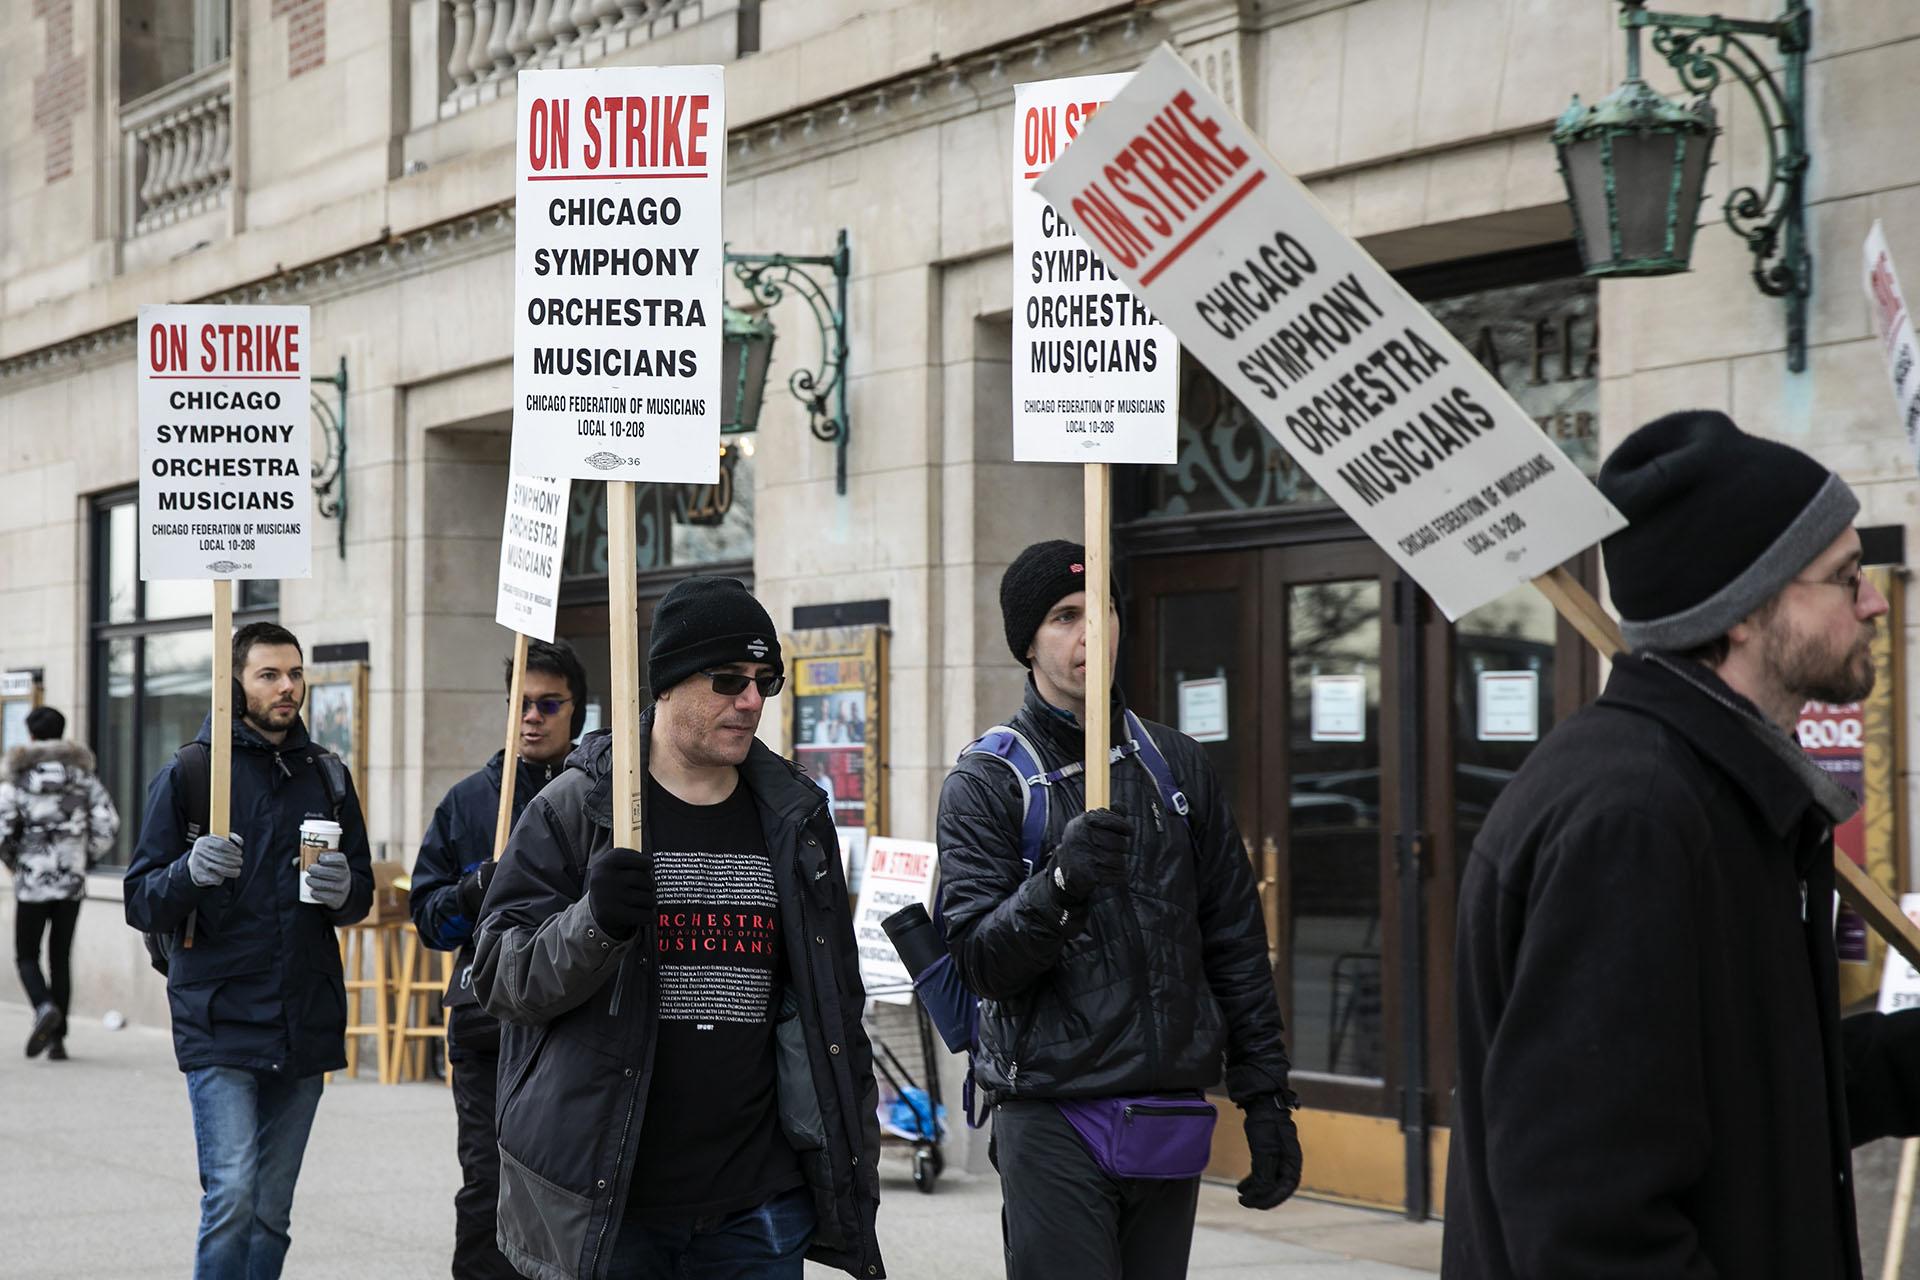 Musicians of the Chicago Symphony Orchestra go on strike and walk the picket line outside the doors of Orchestra Hall on Michigan Avenue, Monday, March 11, 2019. (Ashlee Rezin / Chicago Sun-Times via AP)